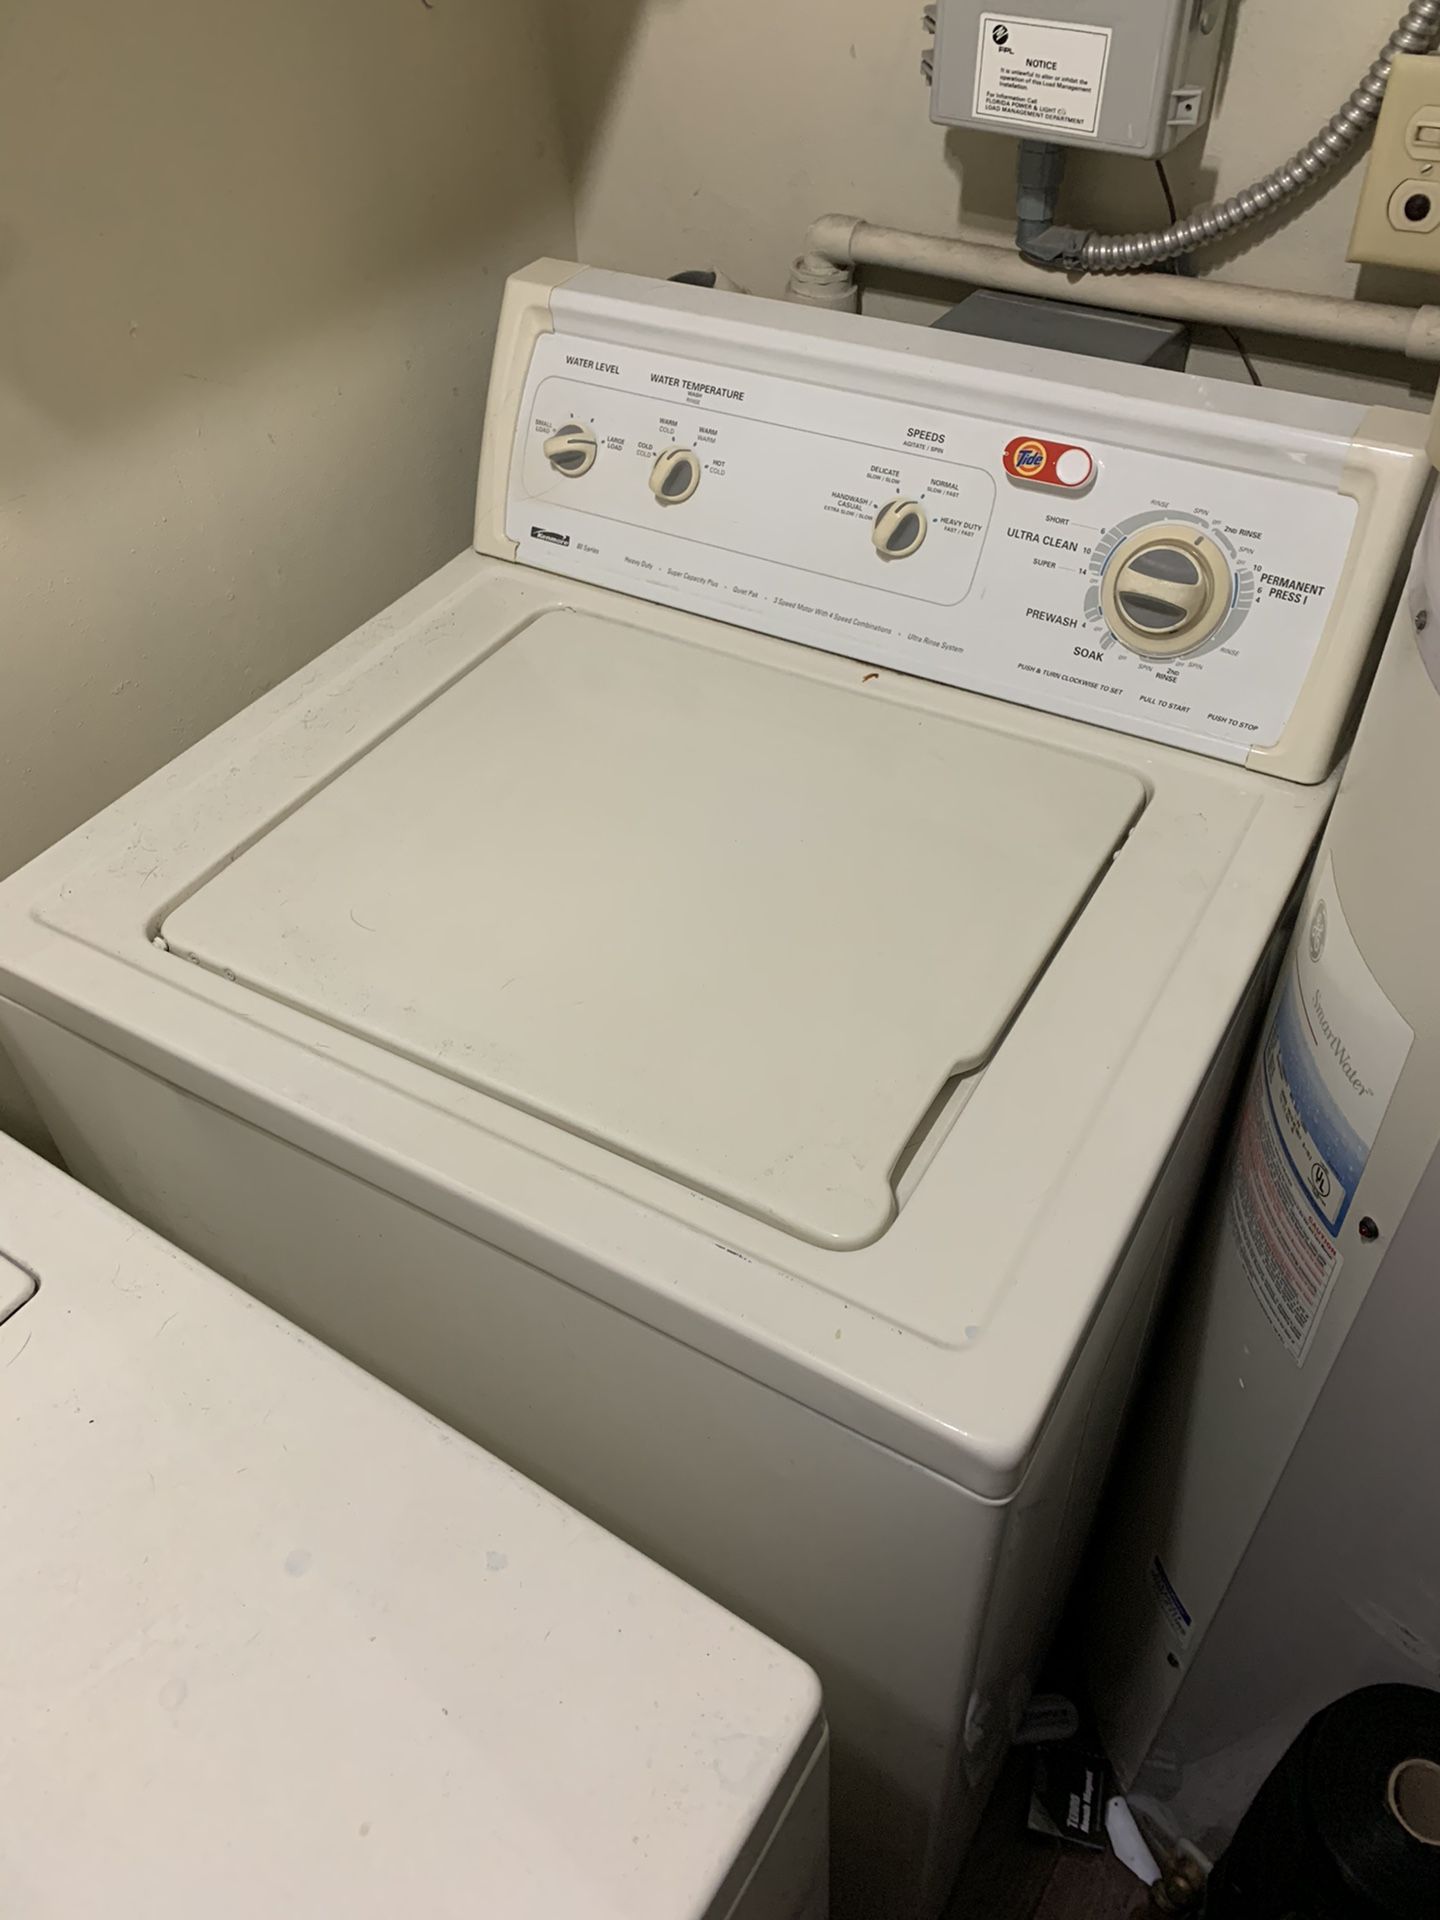 Washer and dryer